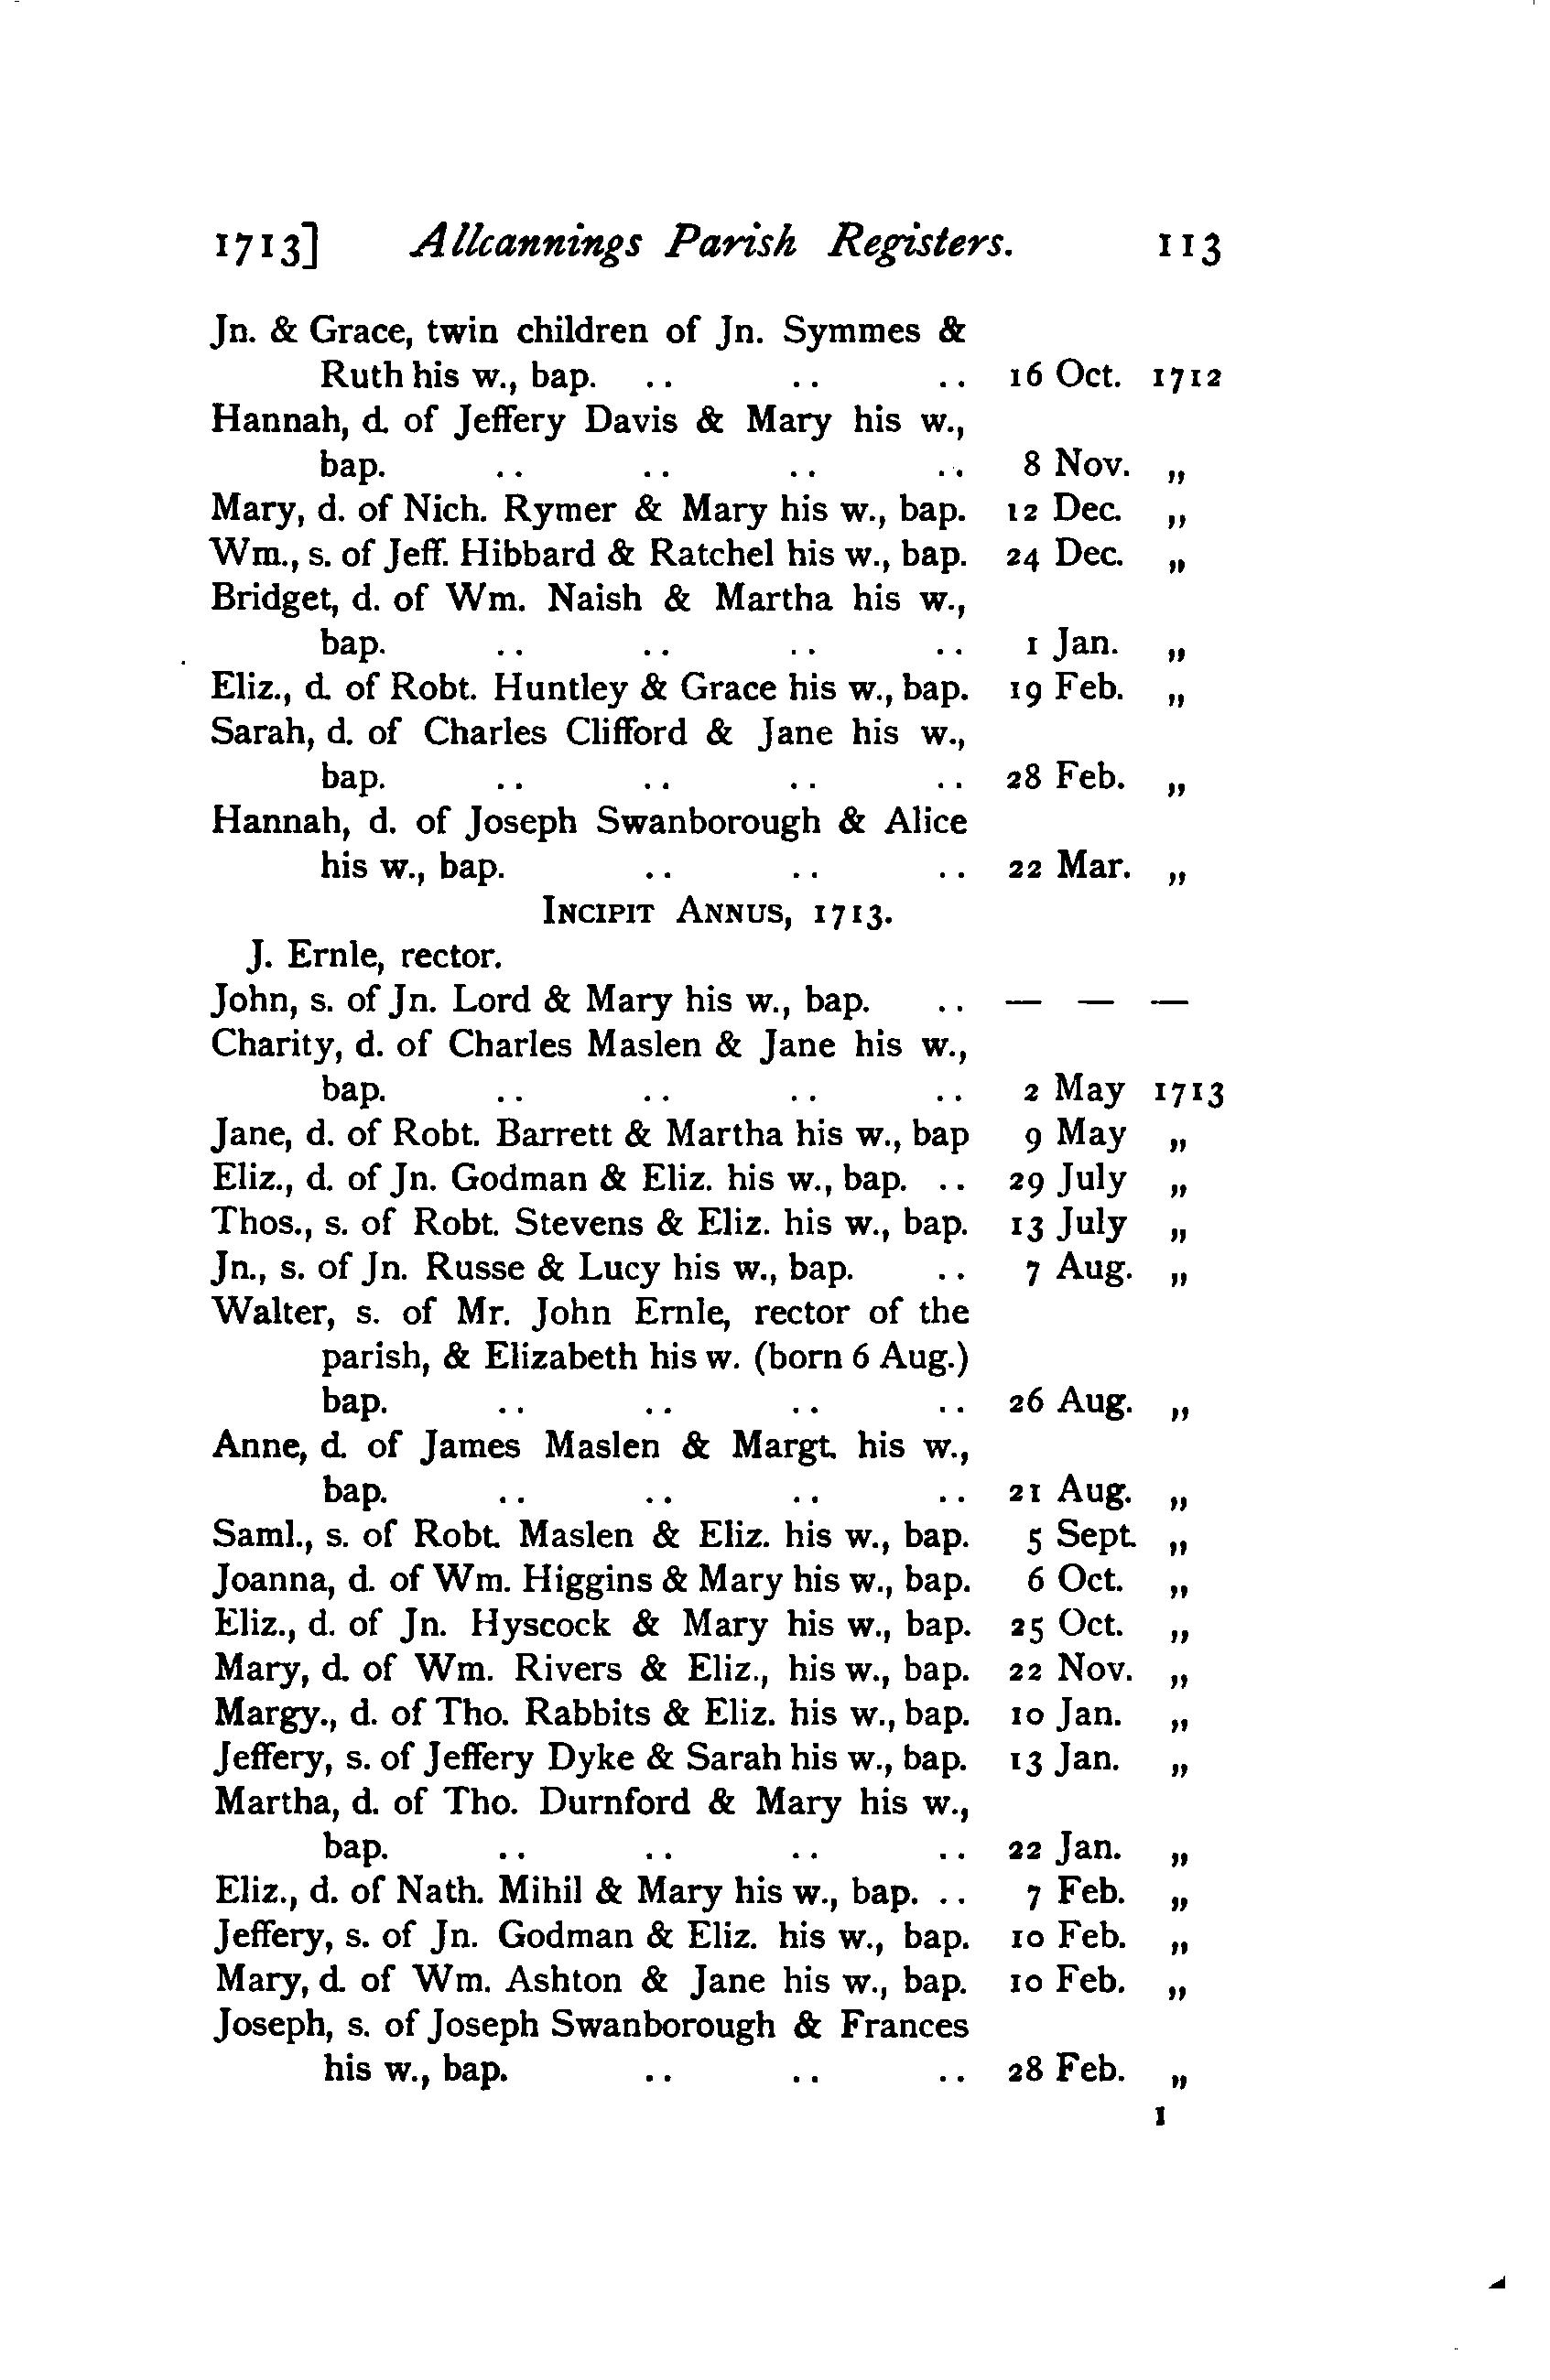 1905 transcript showing baptism of Hannah Swanborough 22nd March 1713